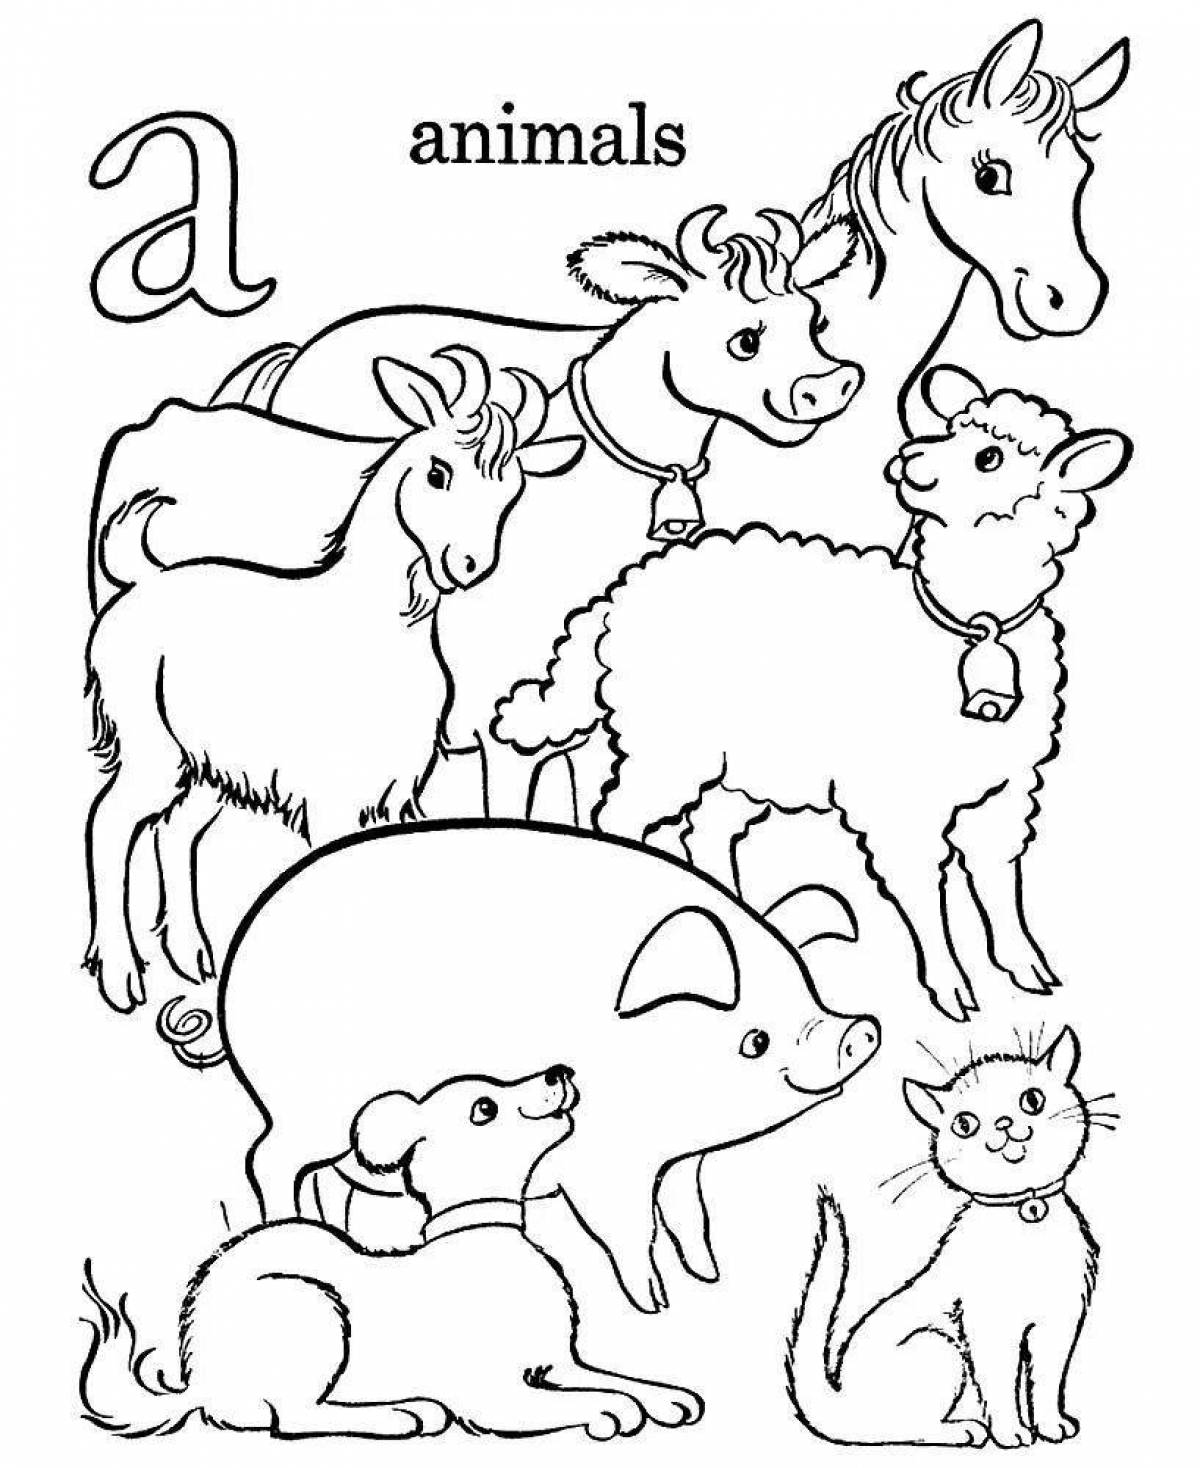 Naughty pet coloring pages for kids